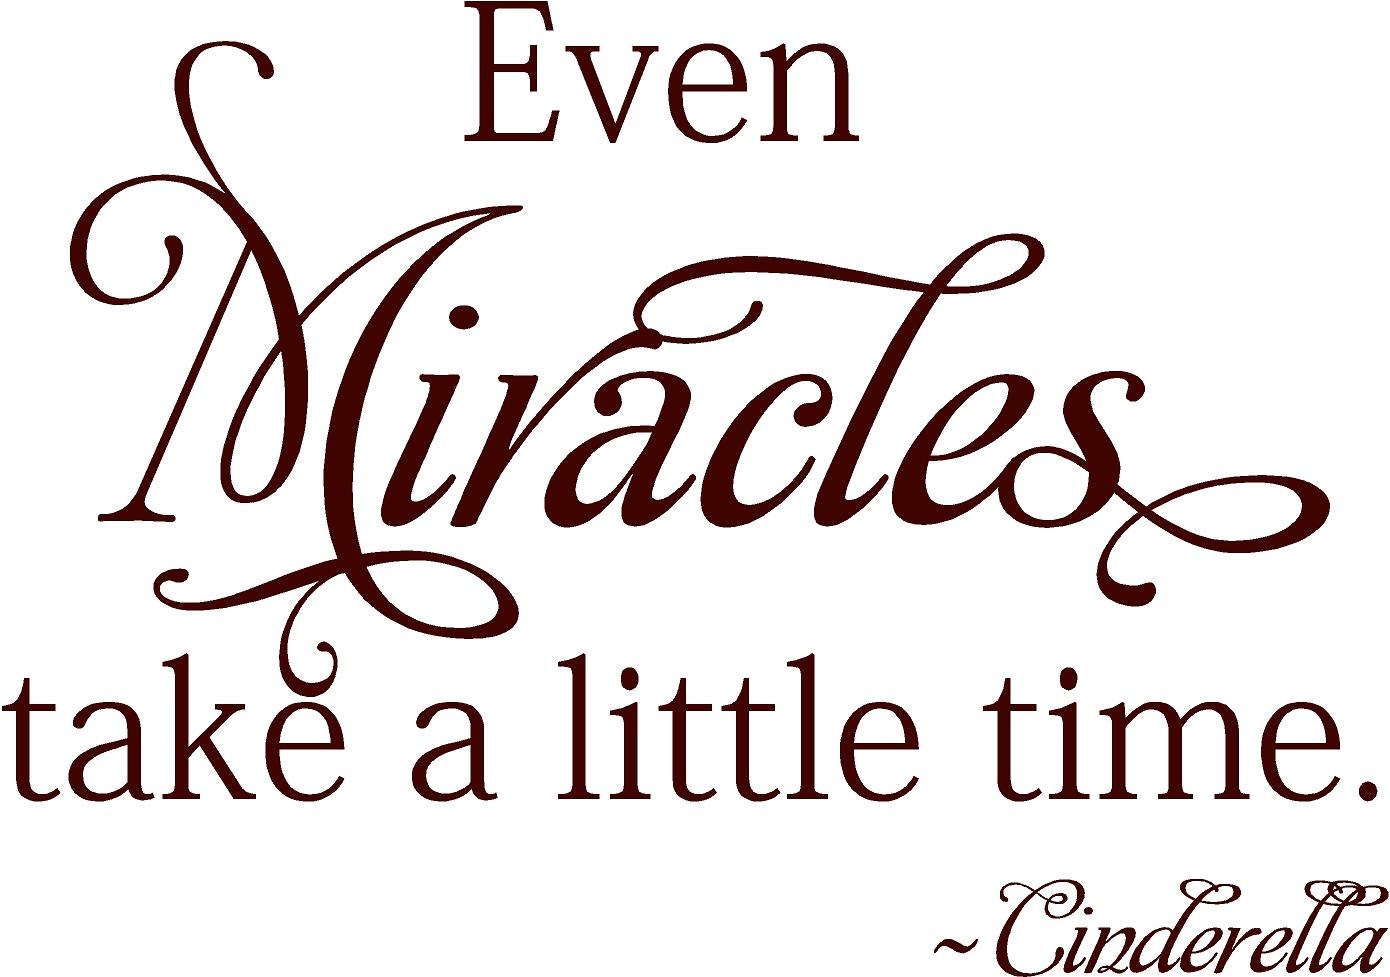 Even Miracles take a little time -Cinderella - Vinyl Lettering wall words graphics Home decor itswritteninvinyl